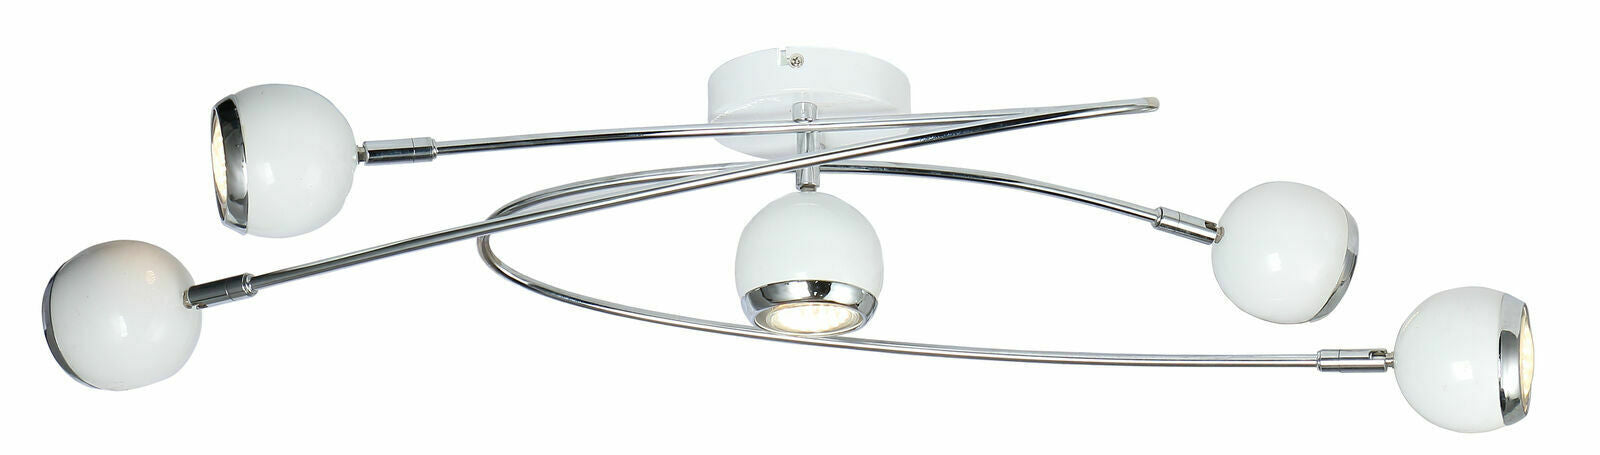 Contemporary 5 Way Ceiling Retro Swirl Arm White Round Adjustable Ball Fitting BALL